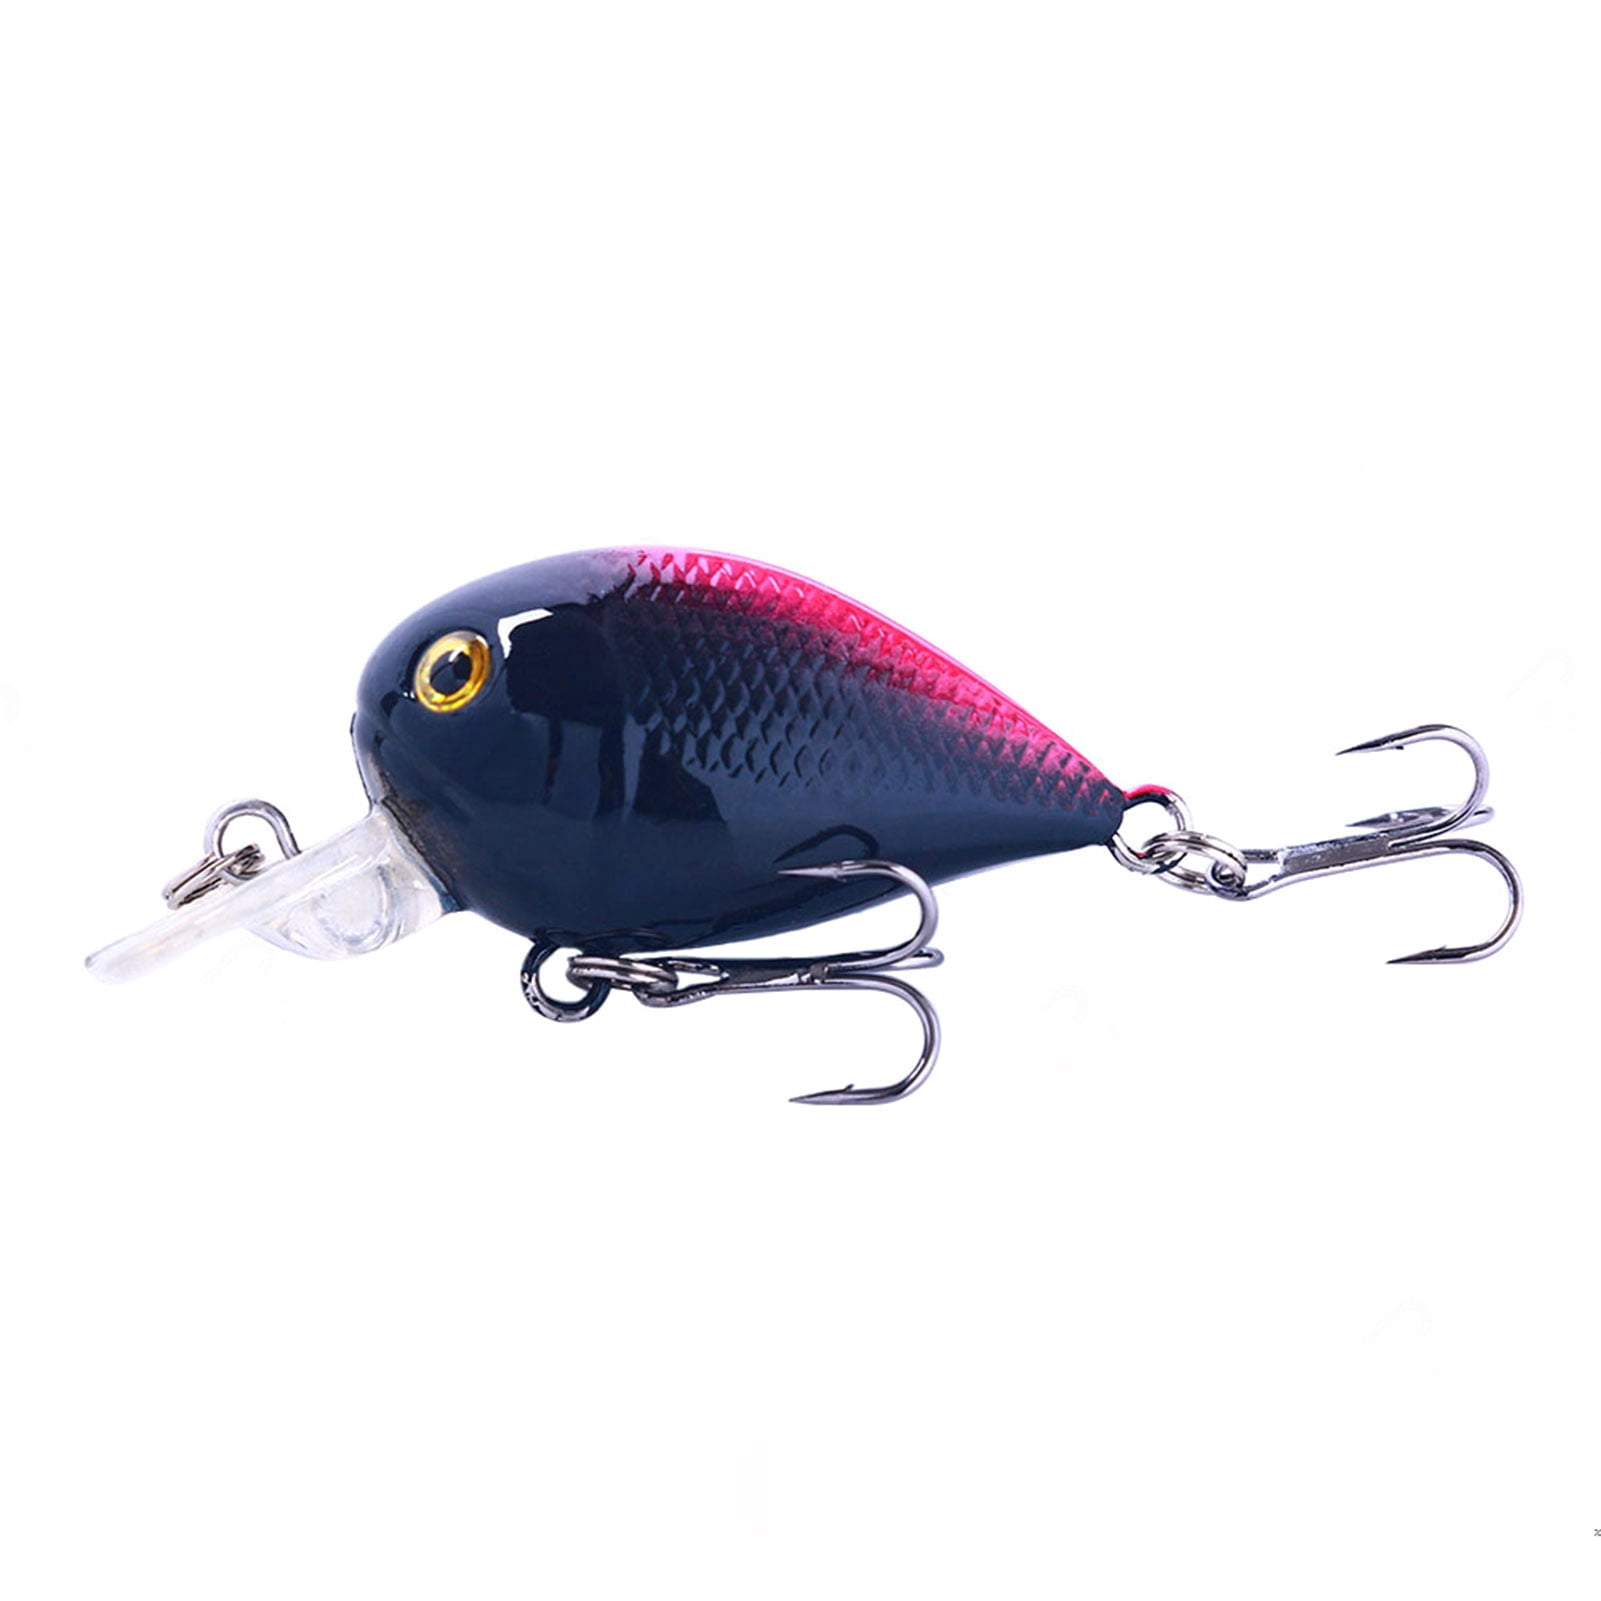 UDIYO 5cm 5.5g Reliable Fishing Bait Realistic Shape Corrosion-resistant  Accessories Durable Fake Bait Fishing Supplies